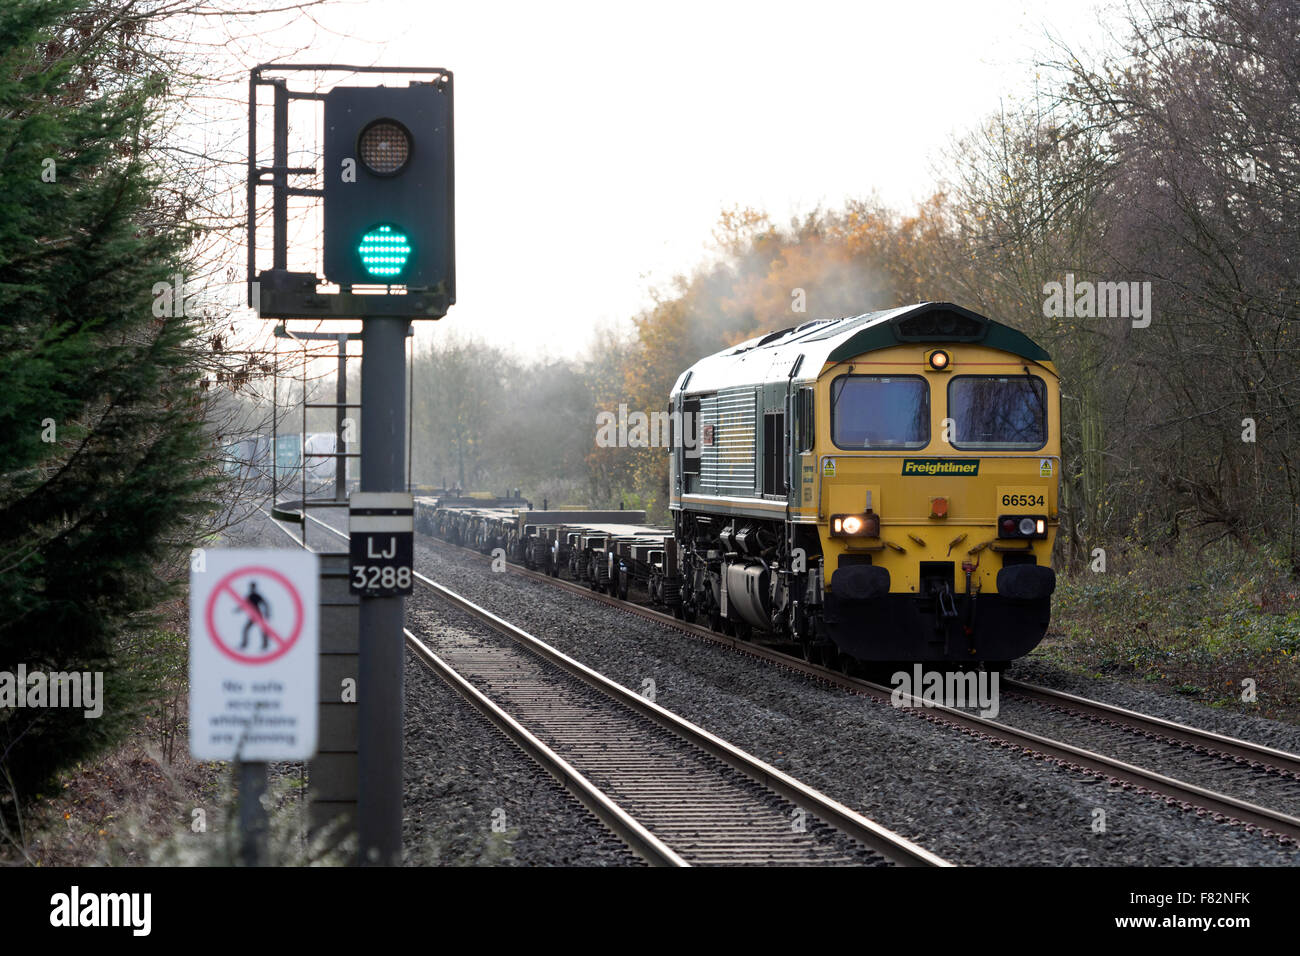 A Class 66 diesel locomotive pulling a freight train at Lapworth, Warwickshire, England, UK Stock Photo